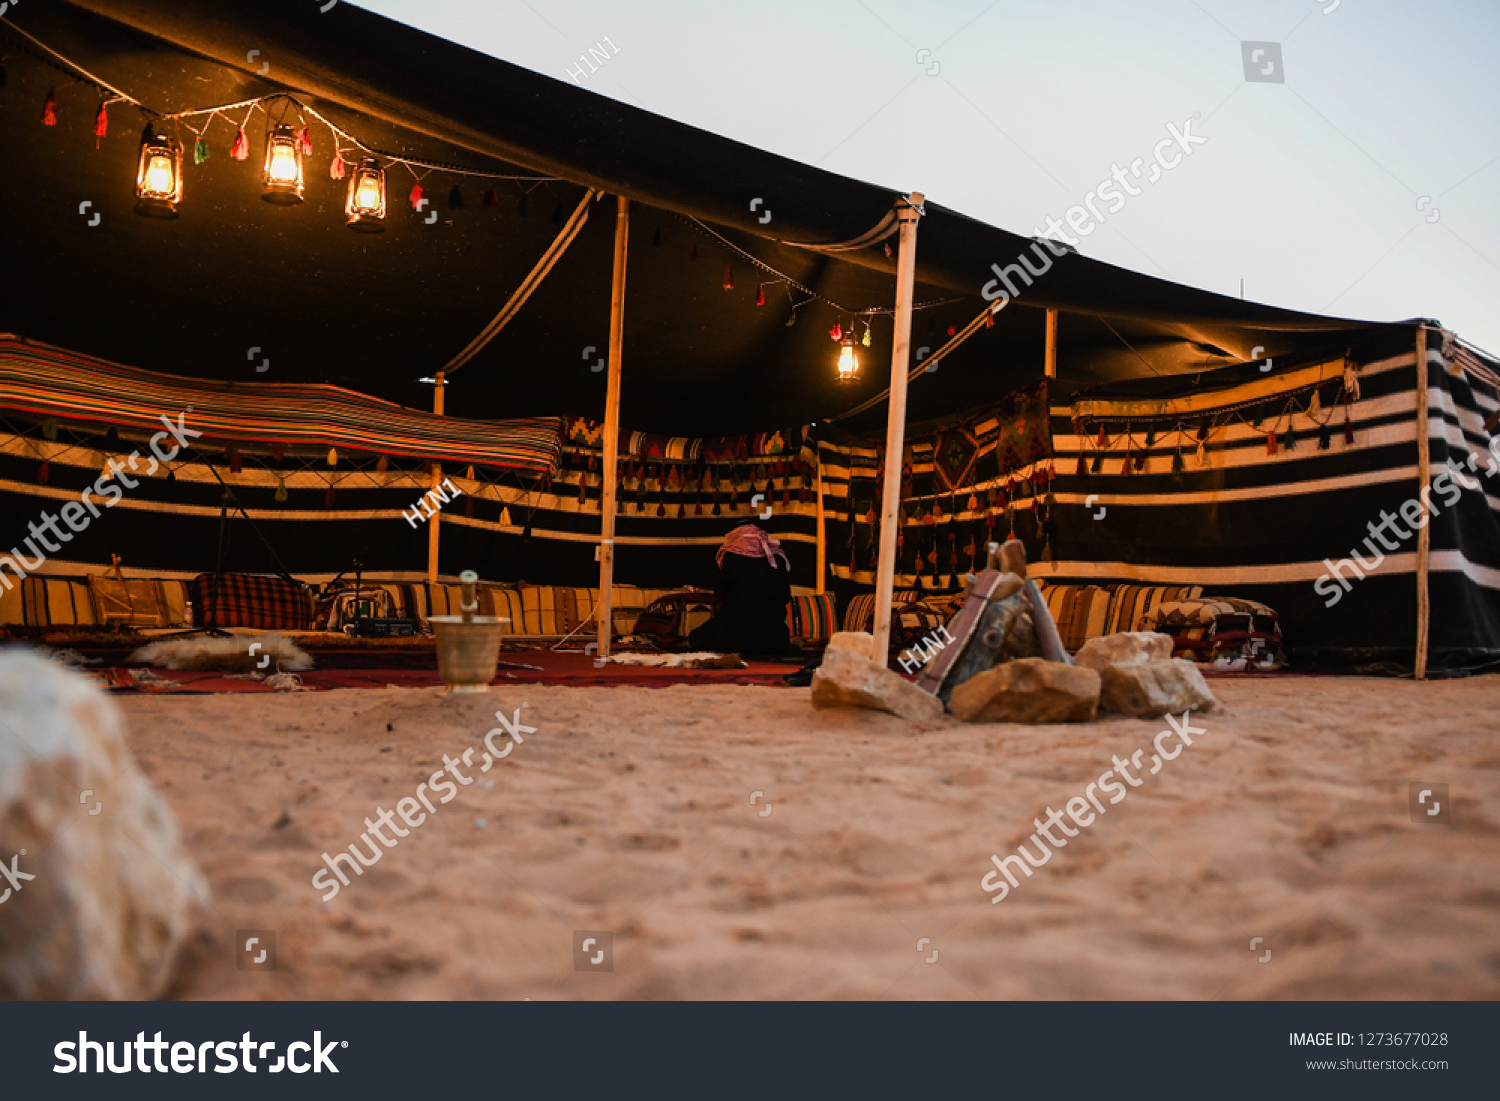 Arabian traditional tent is an old house that expose the Arab heritage. Mainly in Saudi Arabia Desert #1273677028